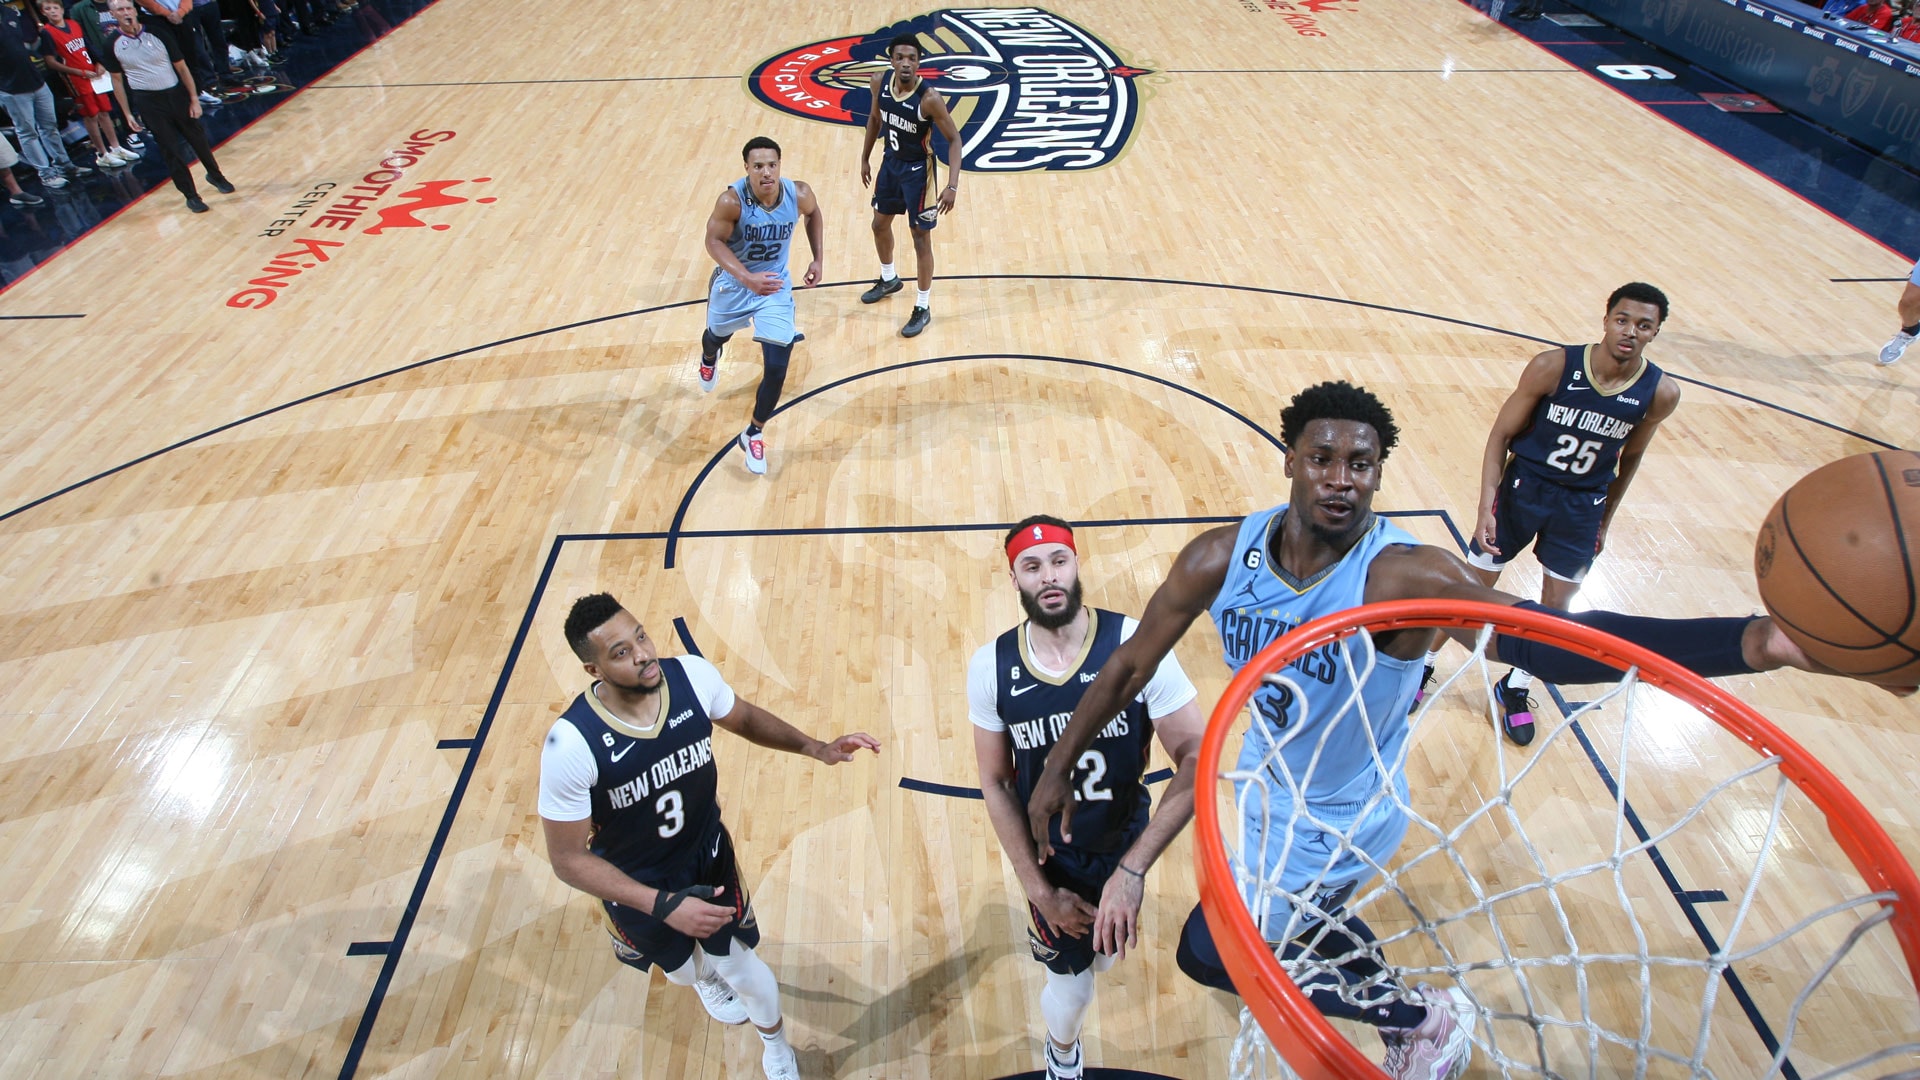 NEW ORLEANS, LA - APRIL 5: Jaren Jackson Jr. #13 of the Memphis Grizzlies goes to the basket during the game on April 5, 2023 at the Smoothie King Center in New Orleans, Louisiana.